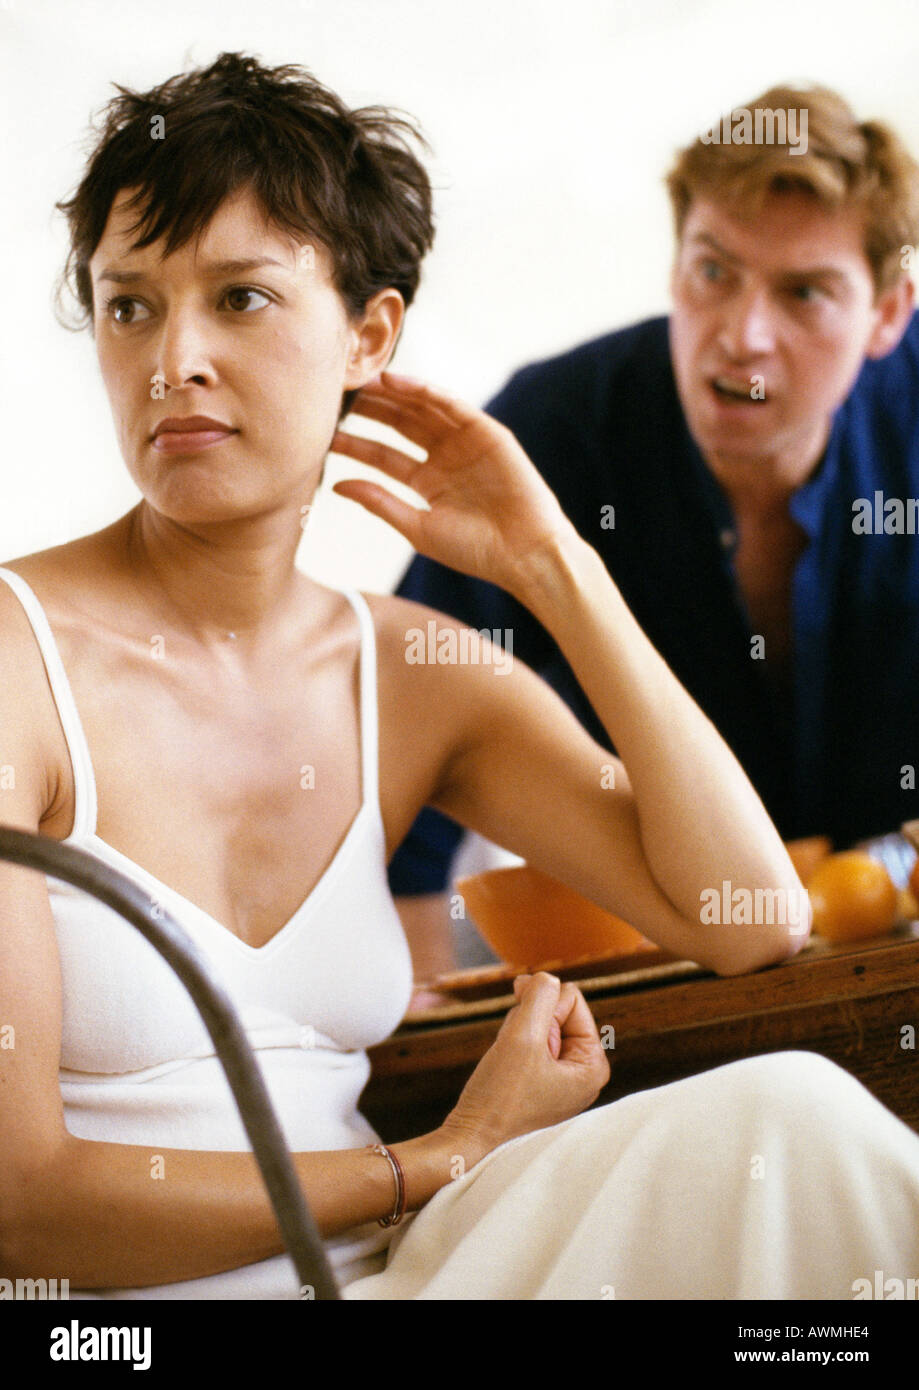 Couple arguing over breakfast, man yelling while woman looks away in anger Stock Photo